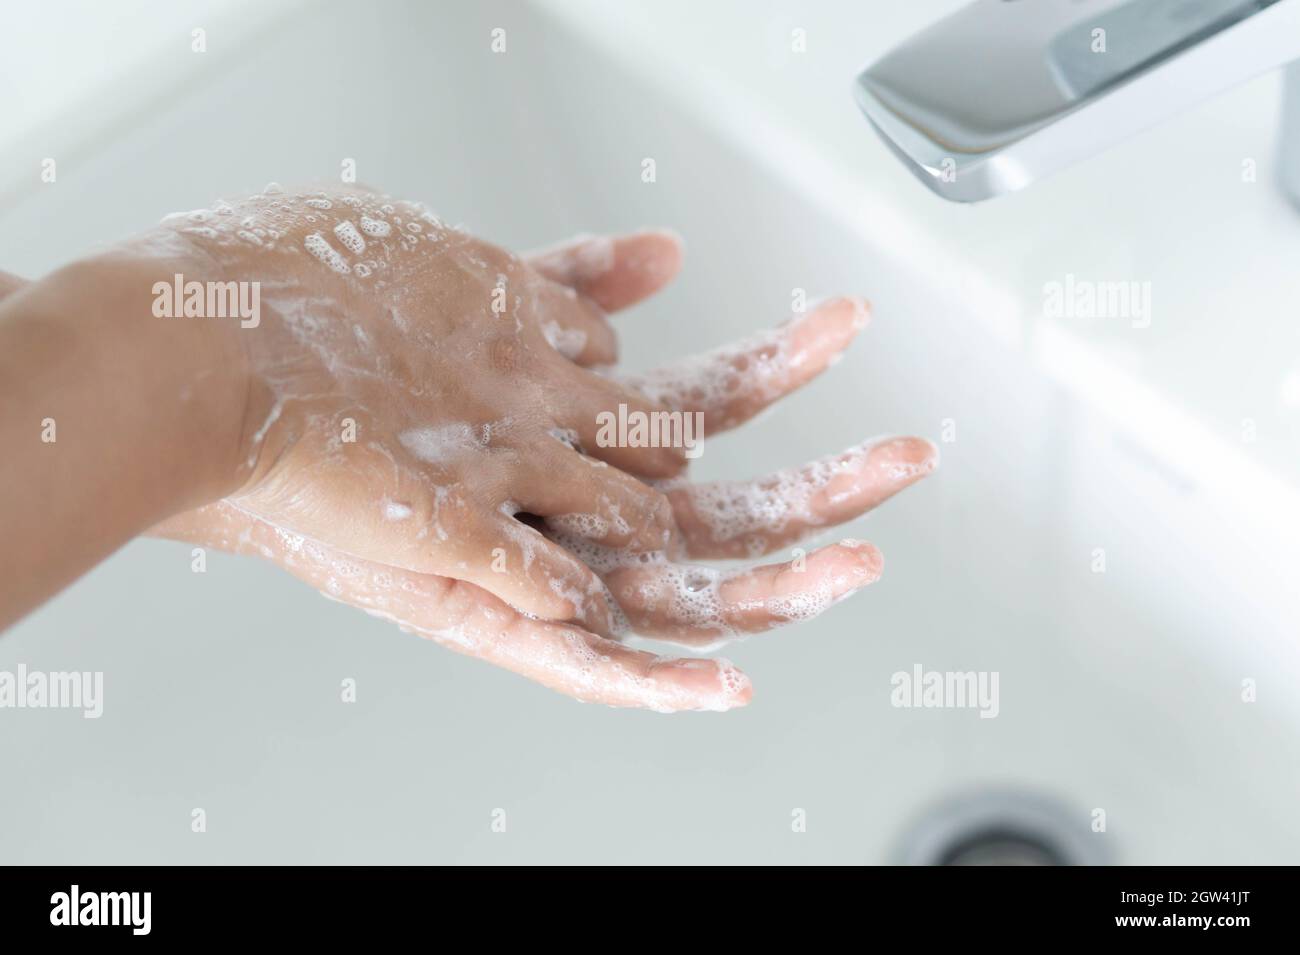 Woman Washing Hands In Sink Stock Photo